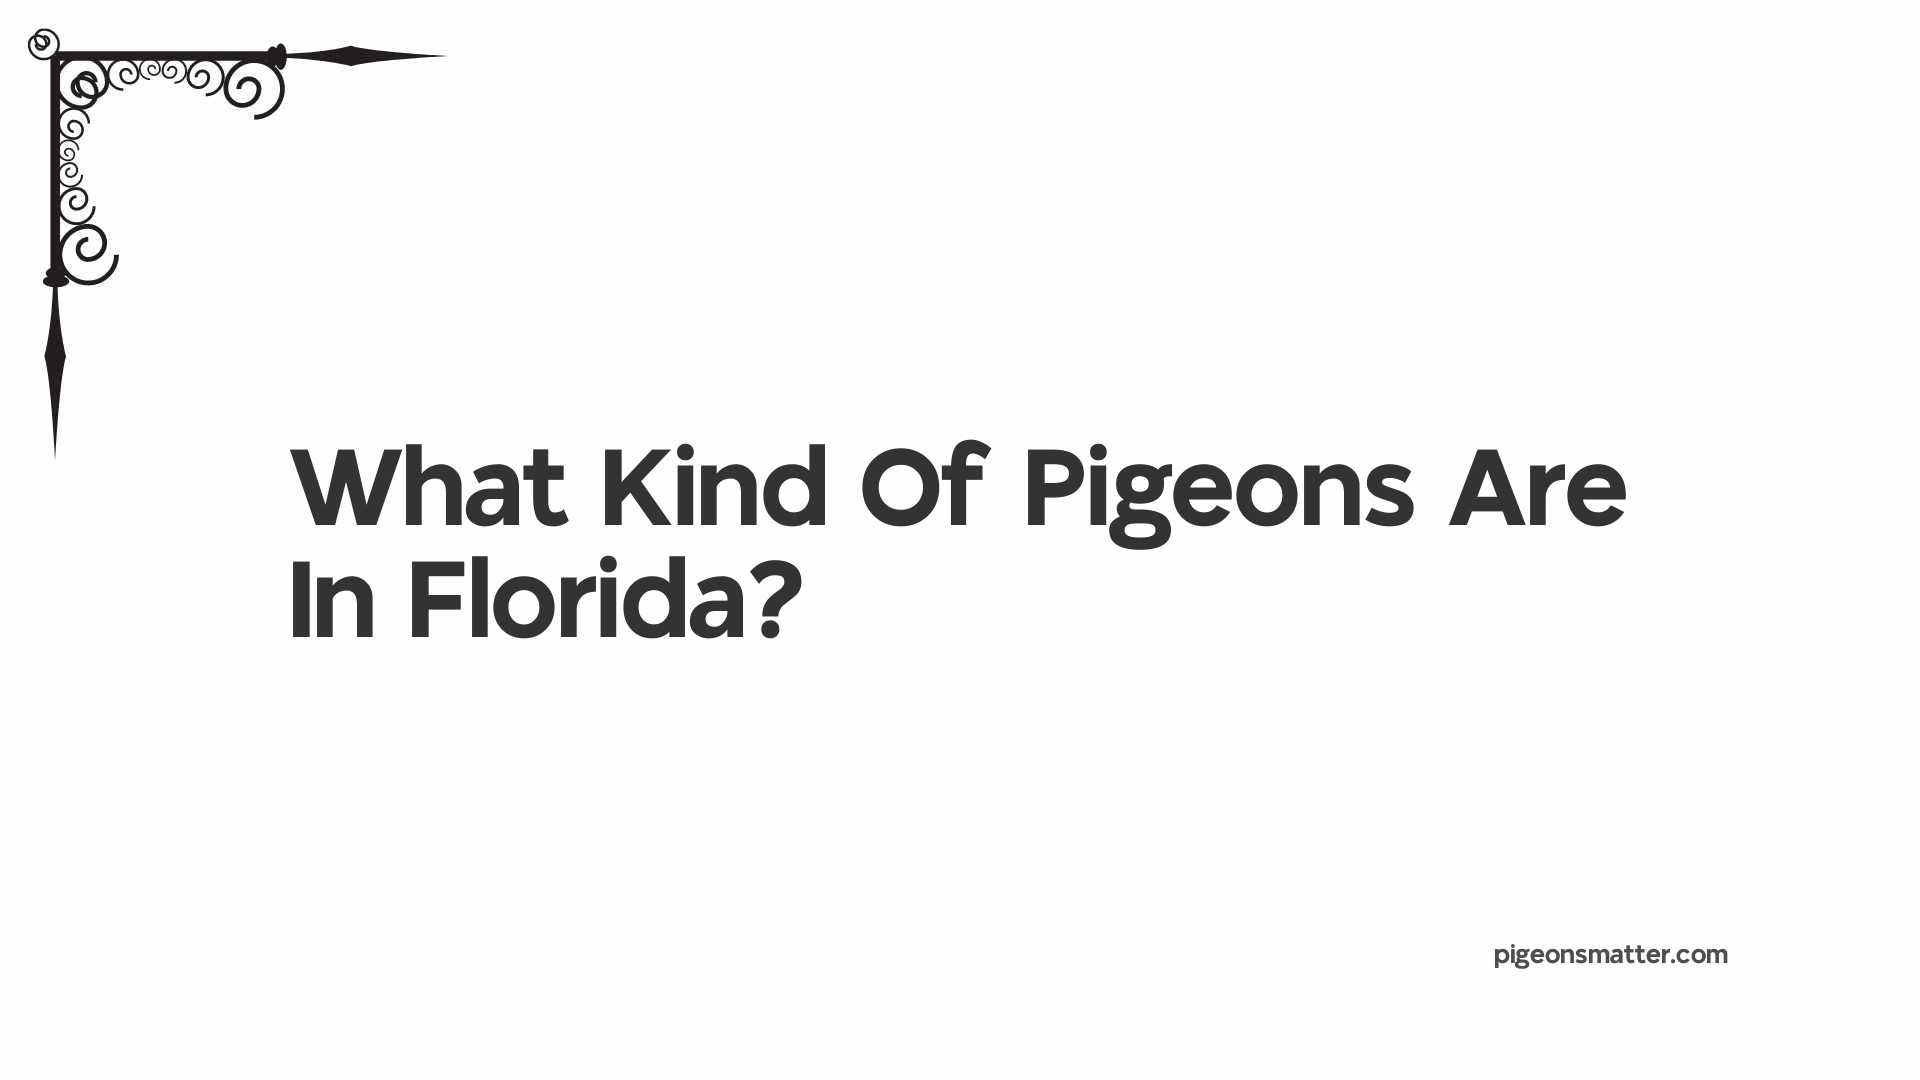 What Kind Of Pigeons Are In Florida?